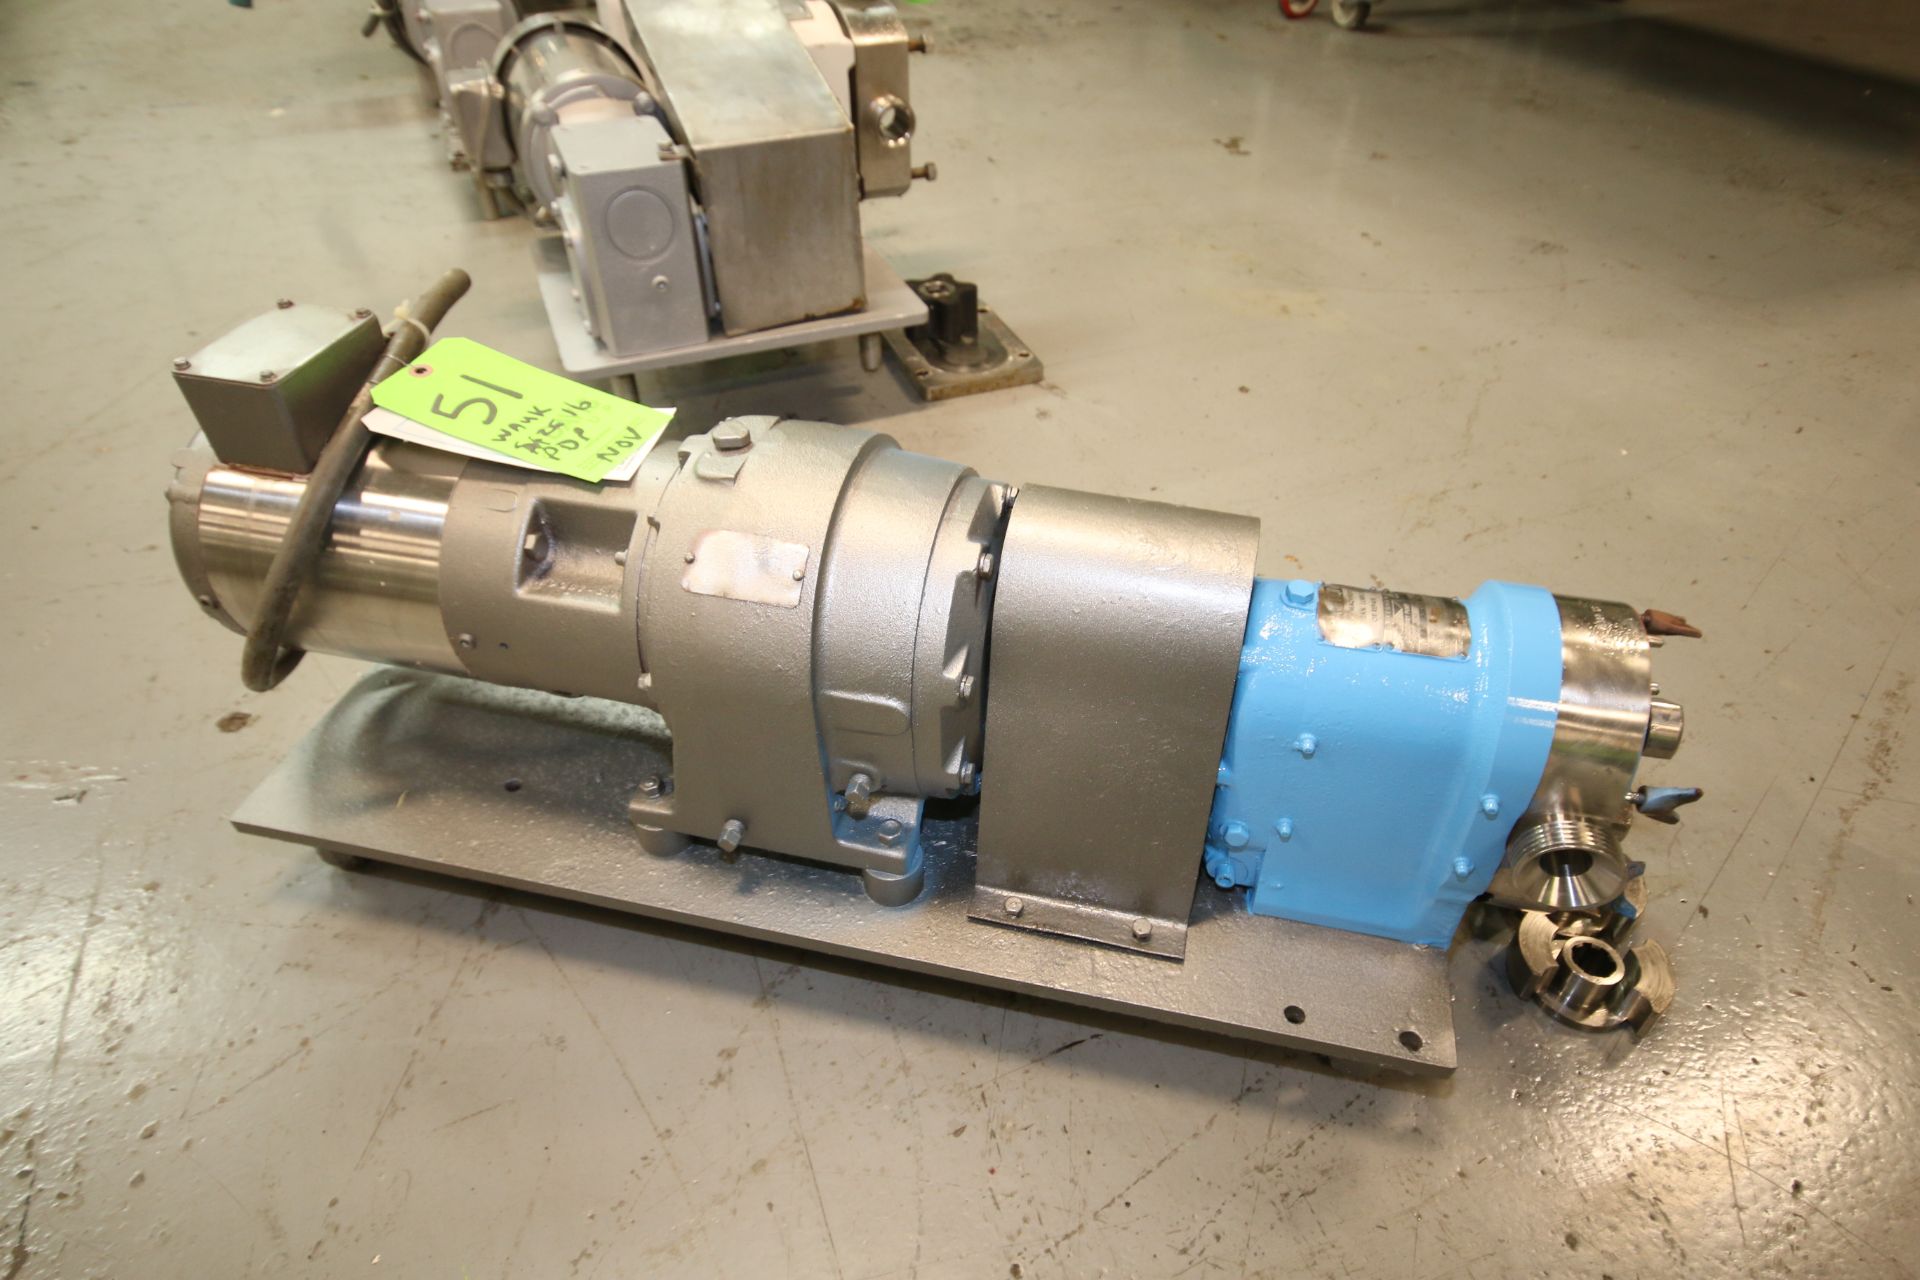 Waukesha Posive Displacement Pump, Size 16, S/N D0 75382 SS, 1.5" Threaded S/S head with S/S Rotors, - Image 3 of 6